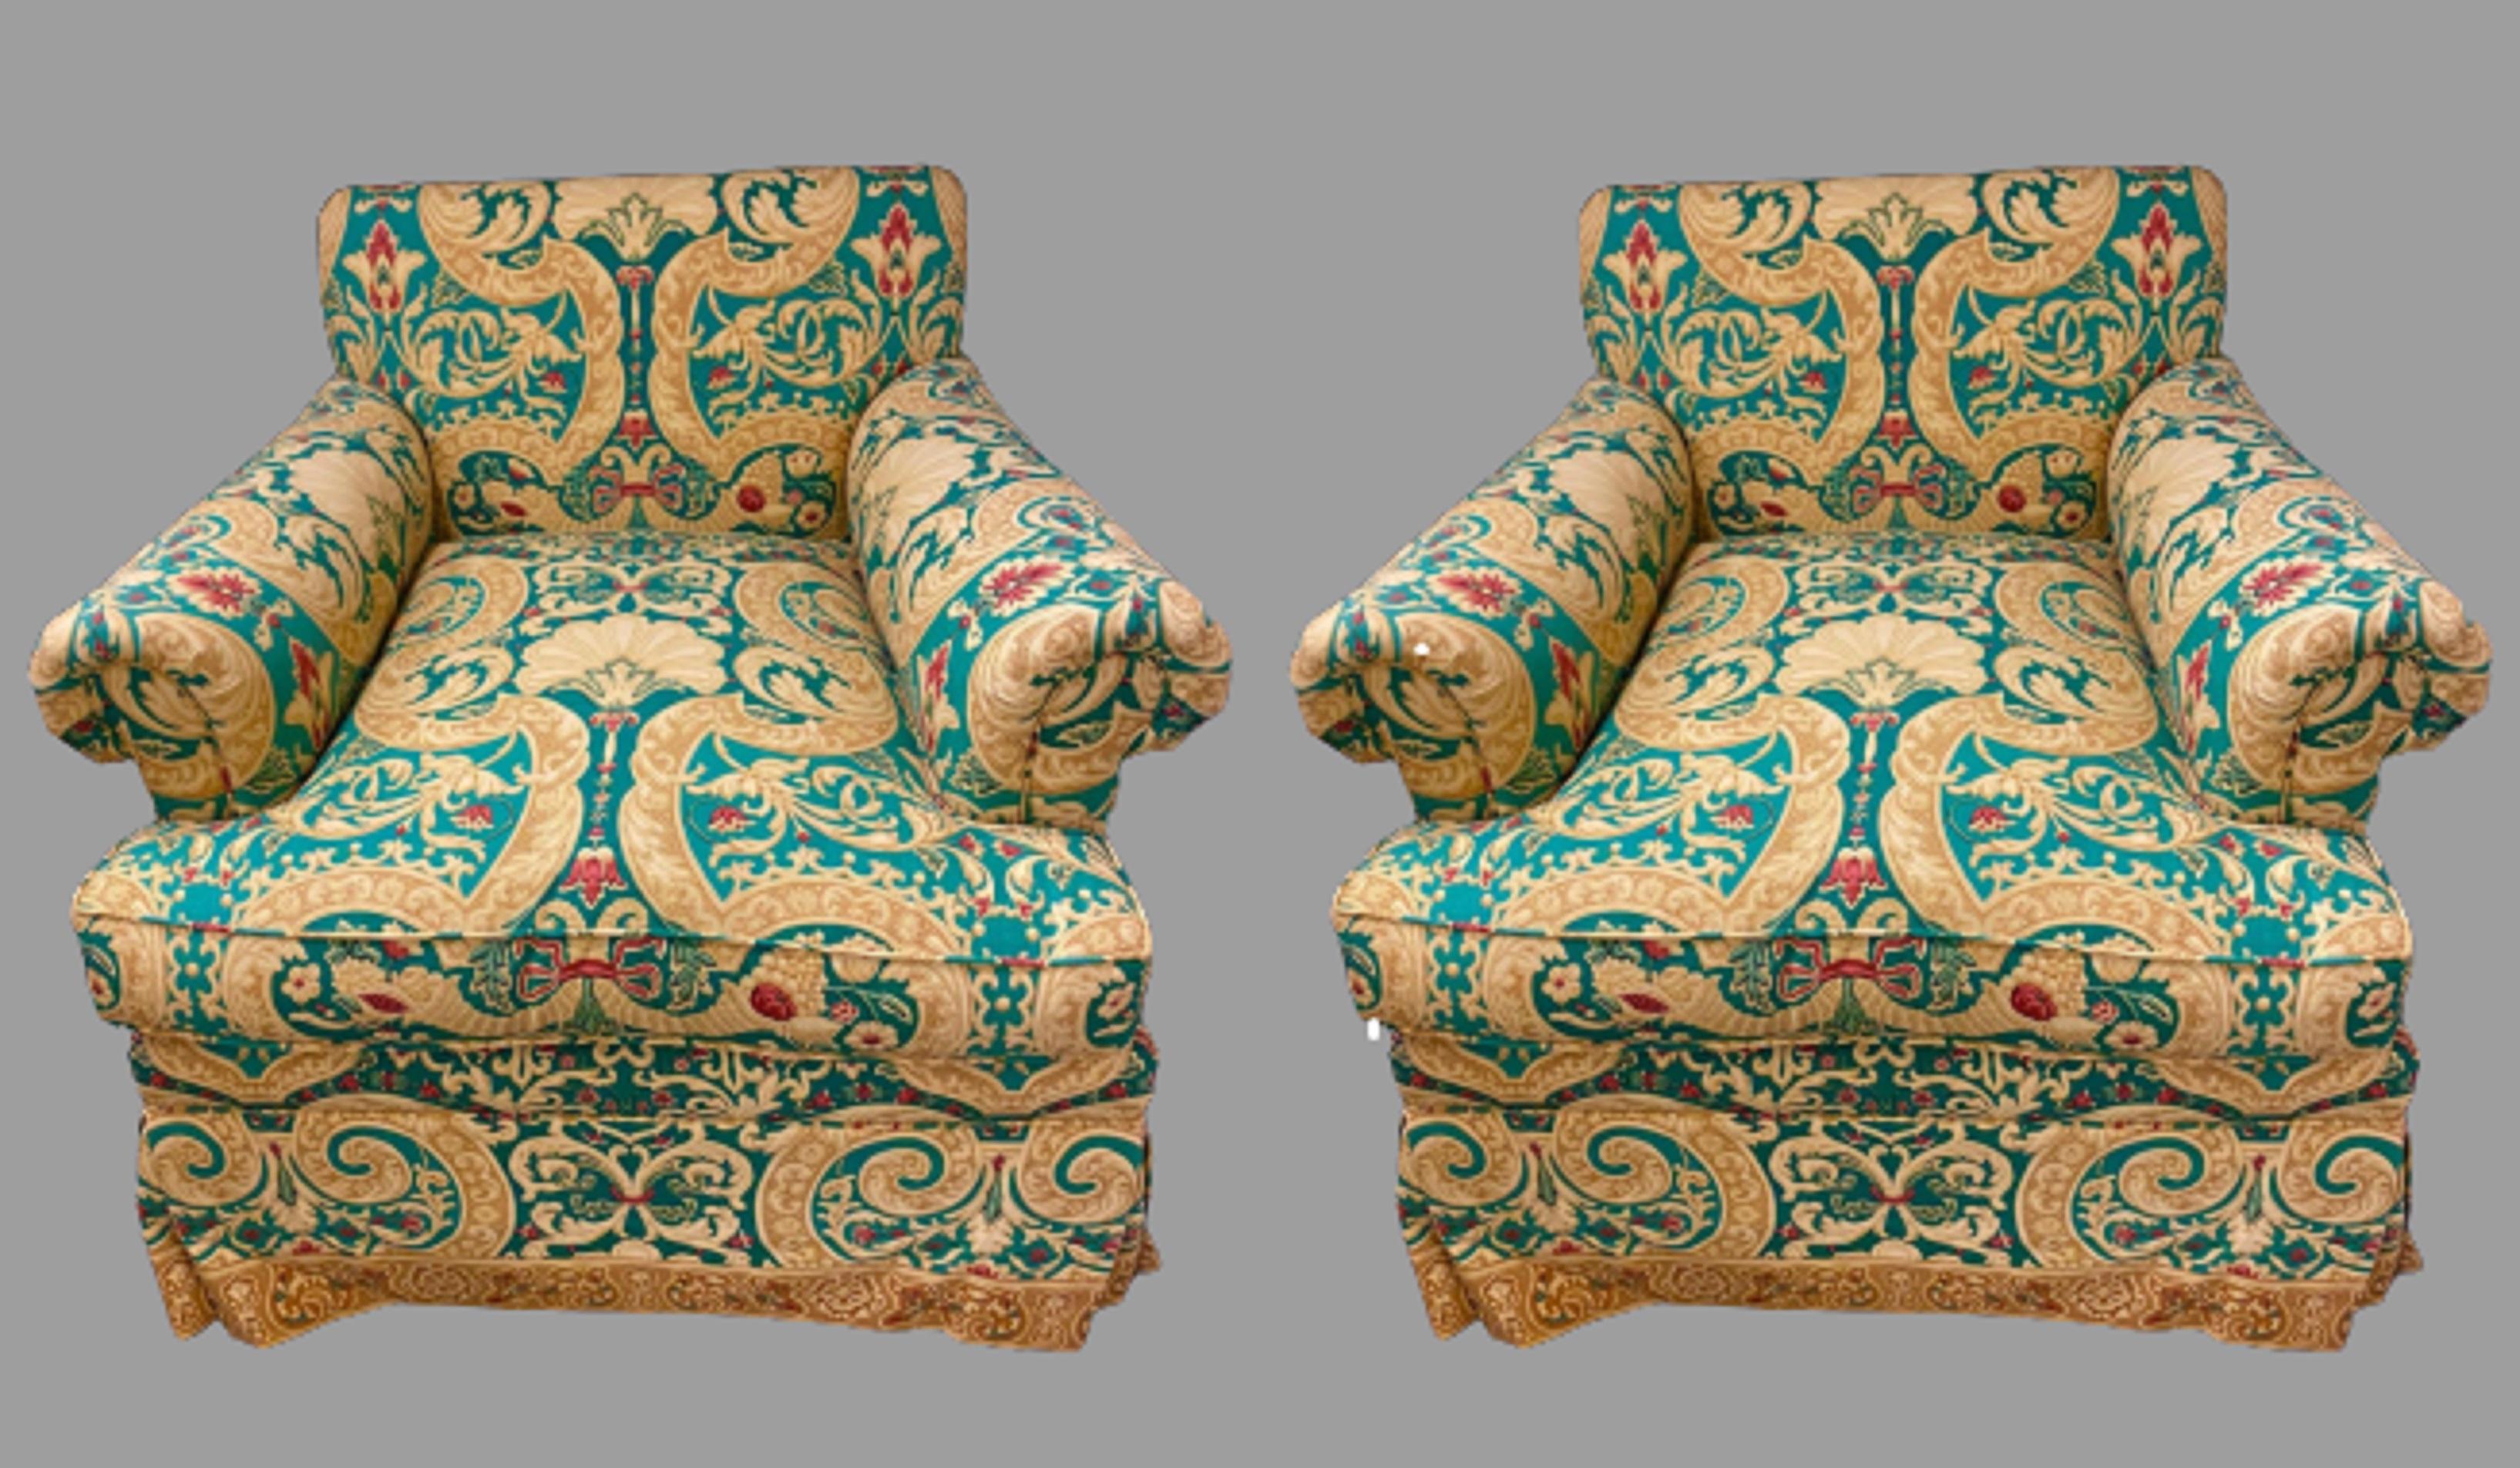 Pair of Milo Baughman. Ed Ferrell and Lewis Mittman Upholstered Swivel Armchairs. This pair of finely upholstered Edward Ferrell + Lewis Mittman custom swivel lounge chairs are done in a fine mid century modern psychedelic fabric. The pair resting